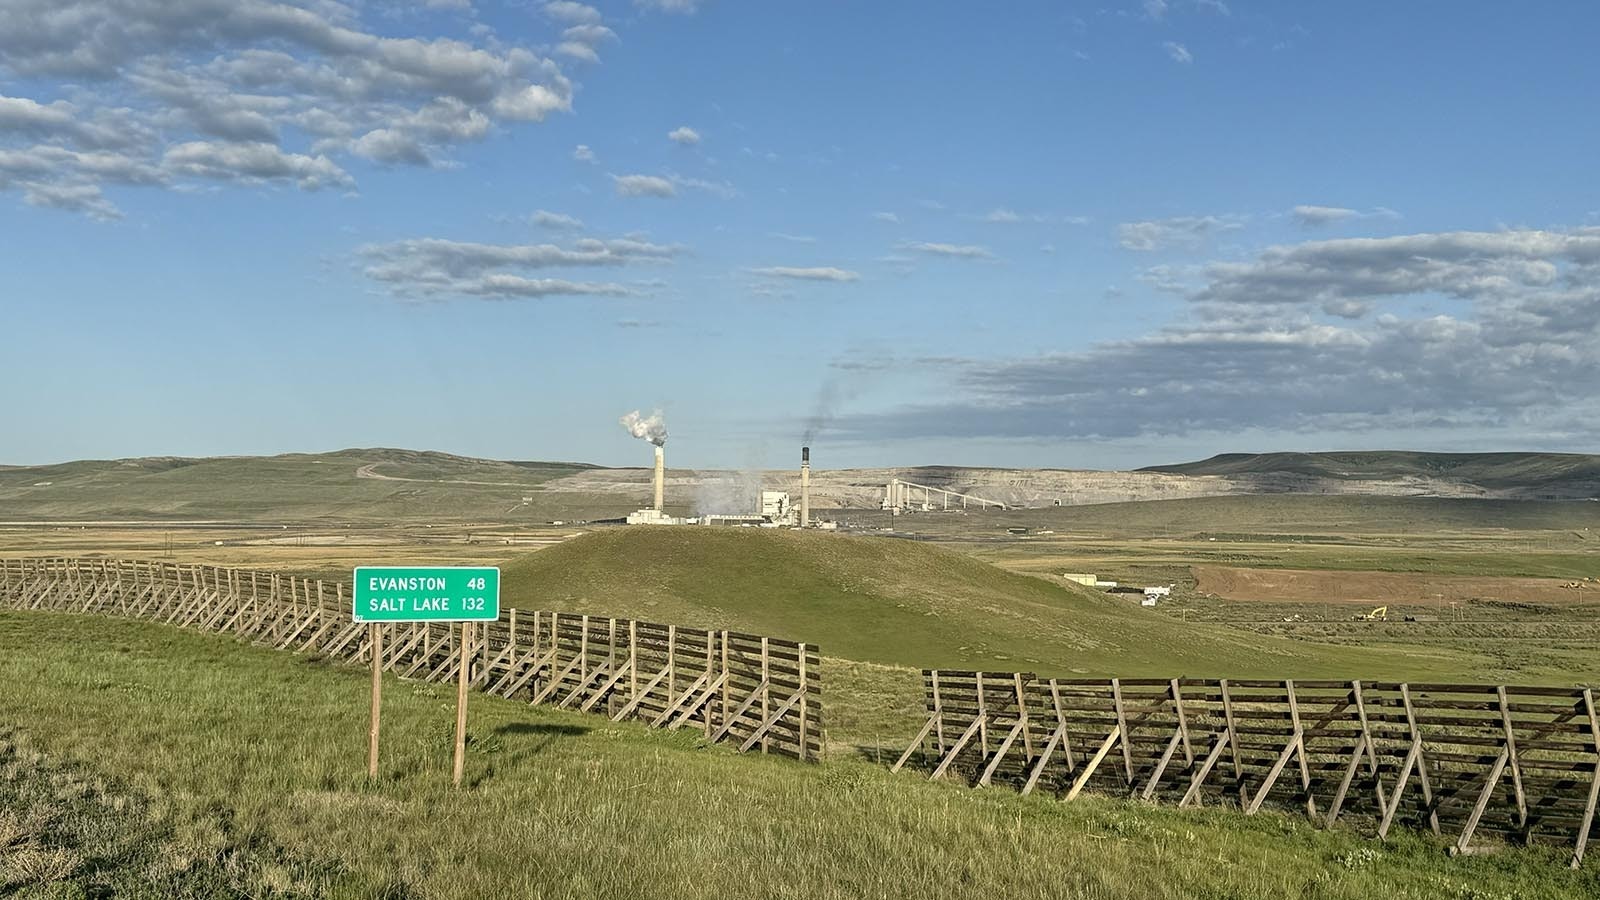 PacifiCorp’s Naughton Power Plant is located just a few miles north of the construction site for TerraPower’s Natrium nuclear reactor in the rolling pastures of sagebrush known as the “flats” by locals.